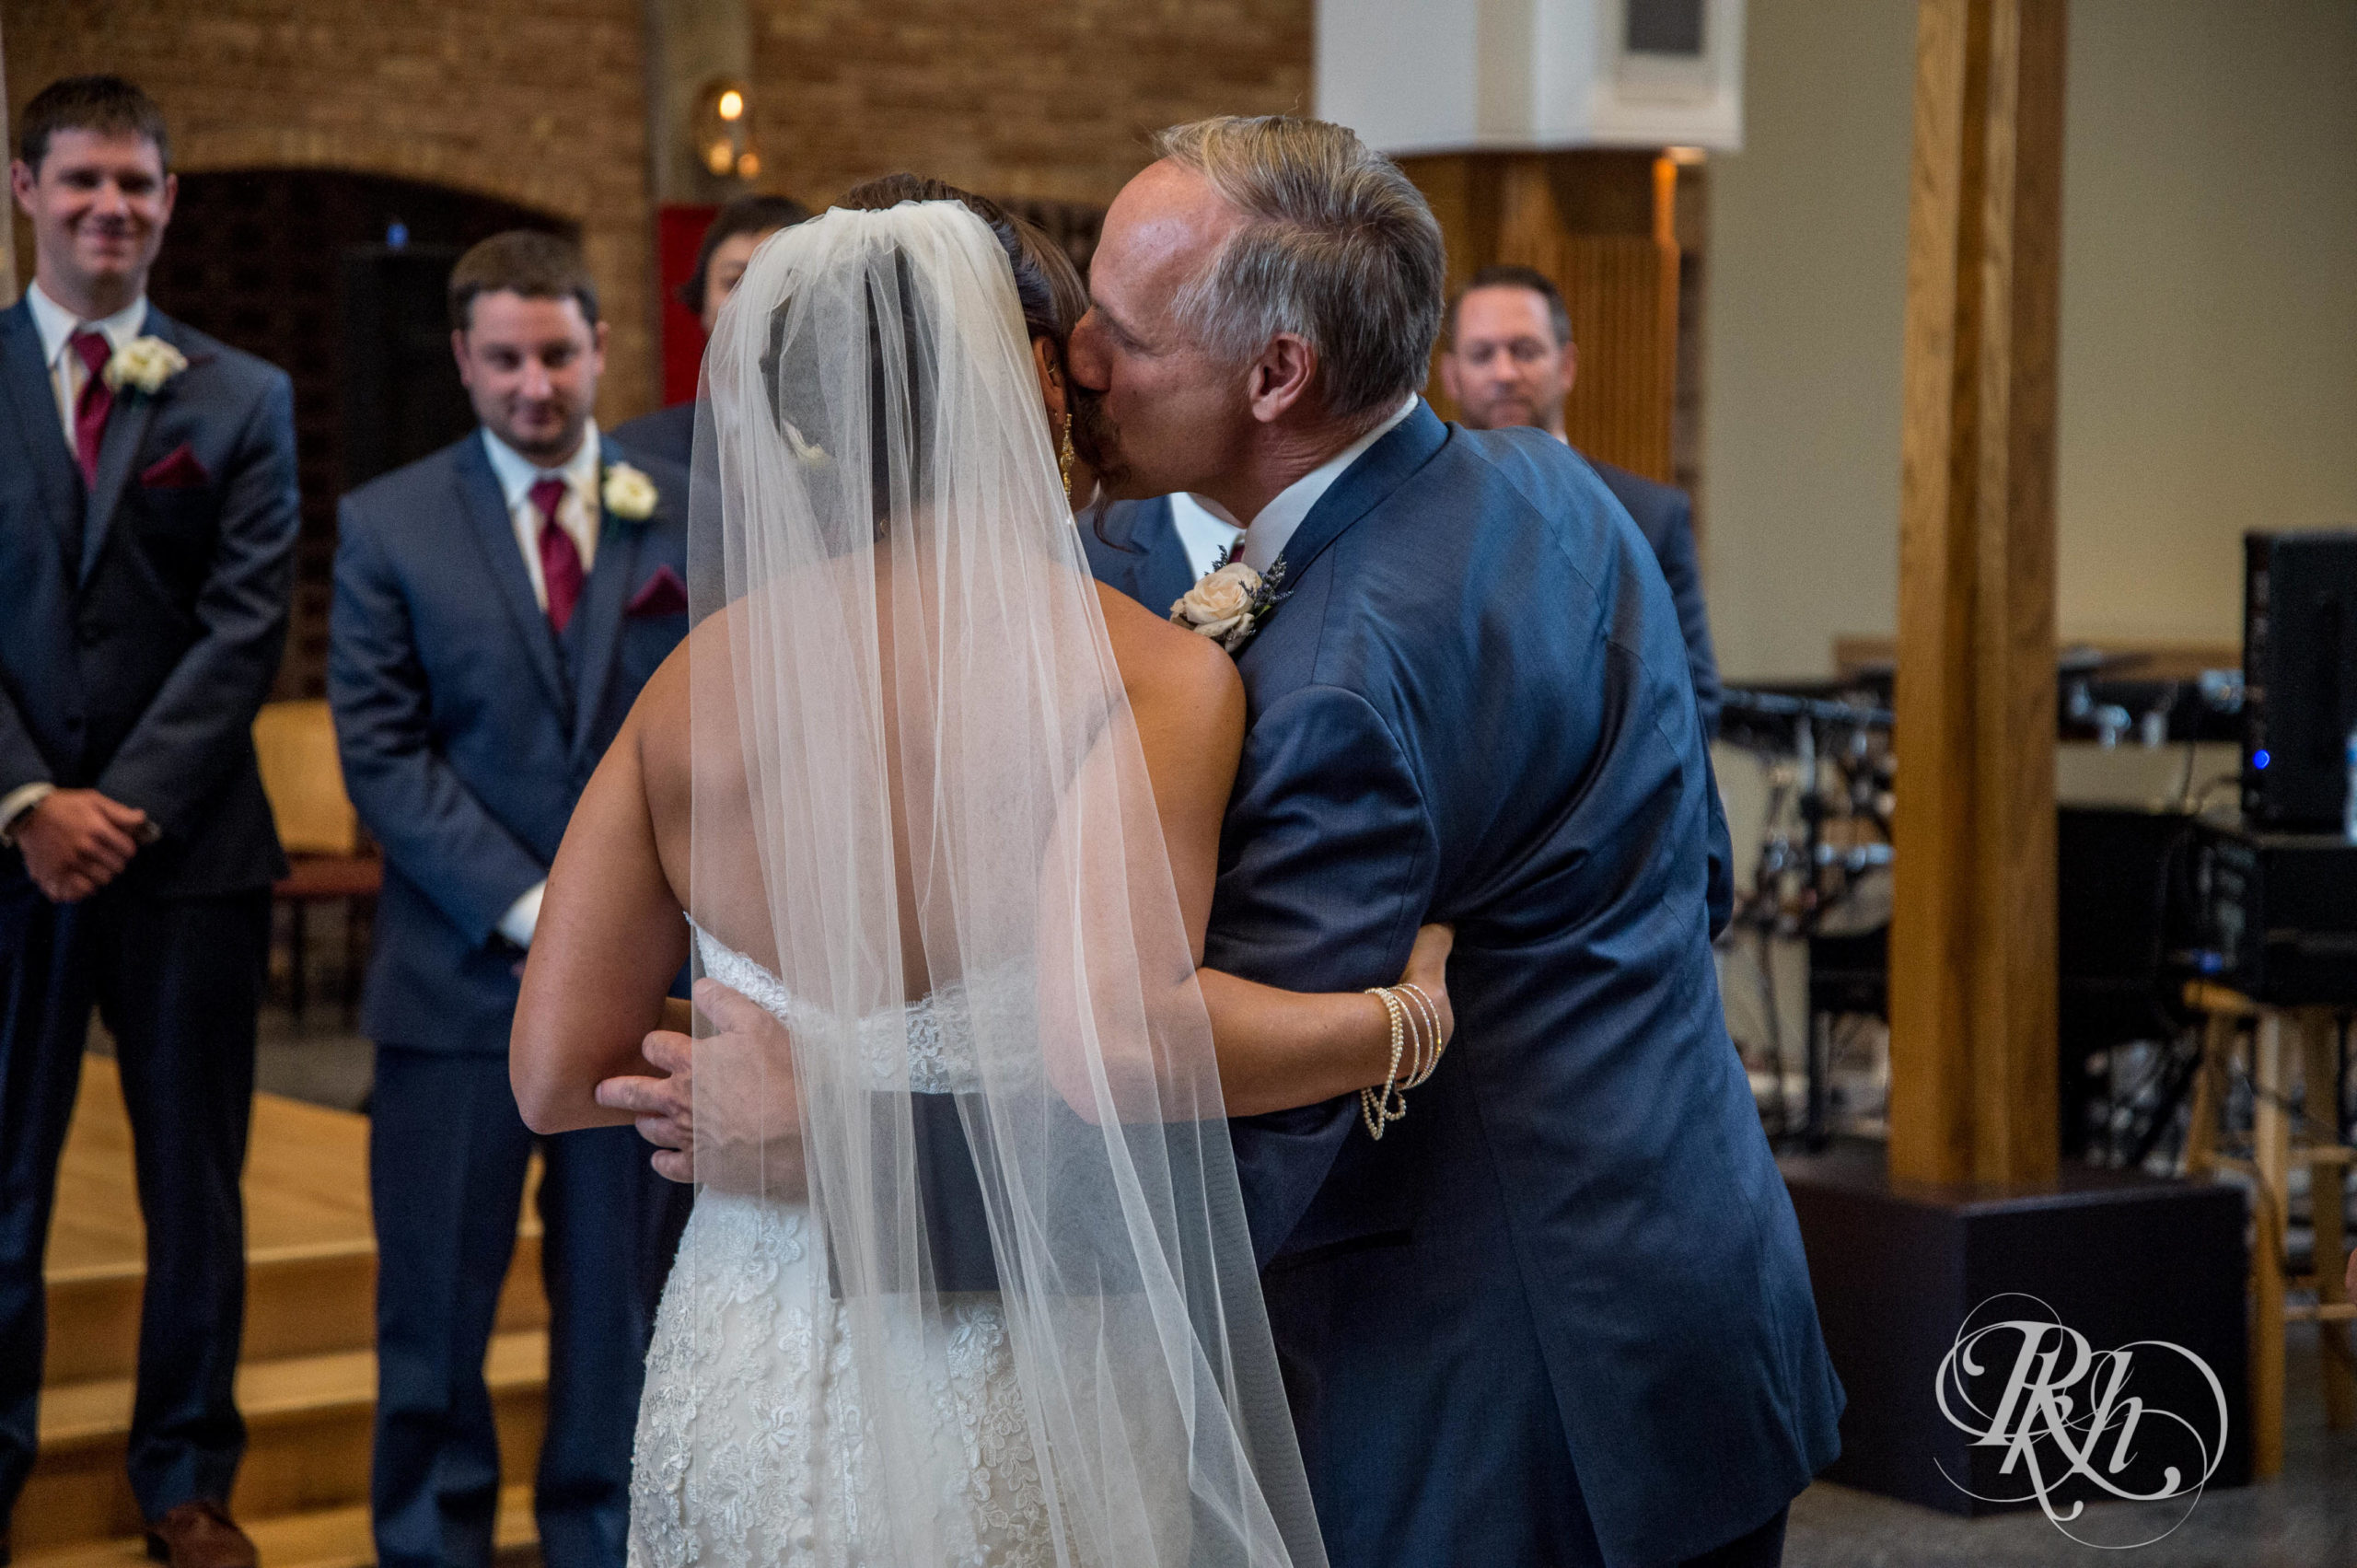 Dad kisses bride on the cheek at wedding ceremony in Minneapolis, Minnesota.